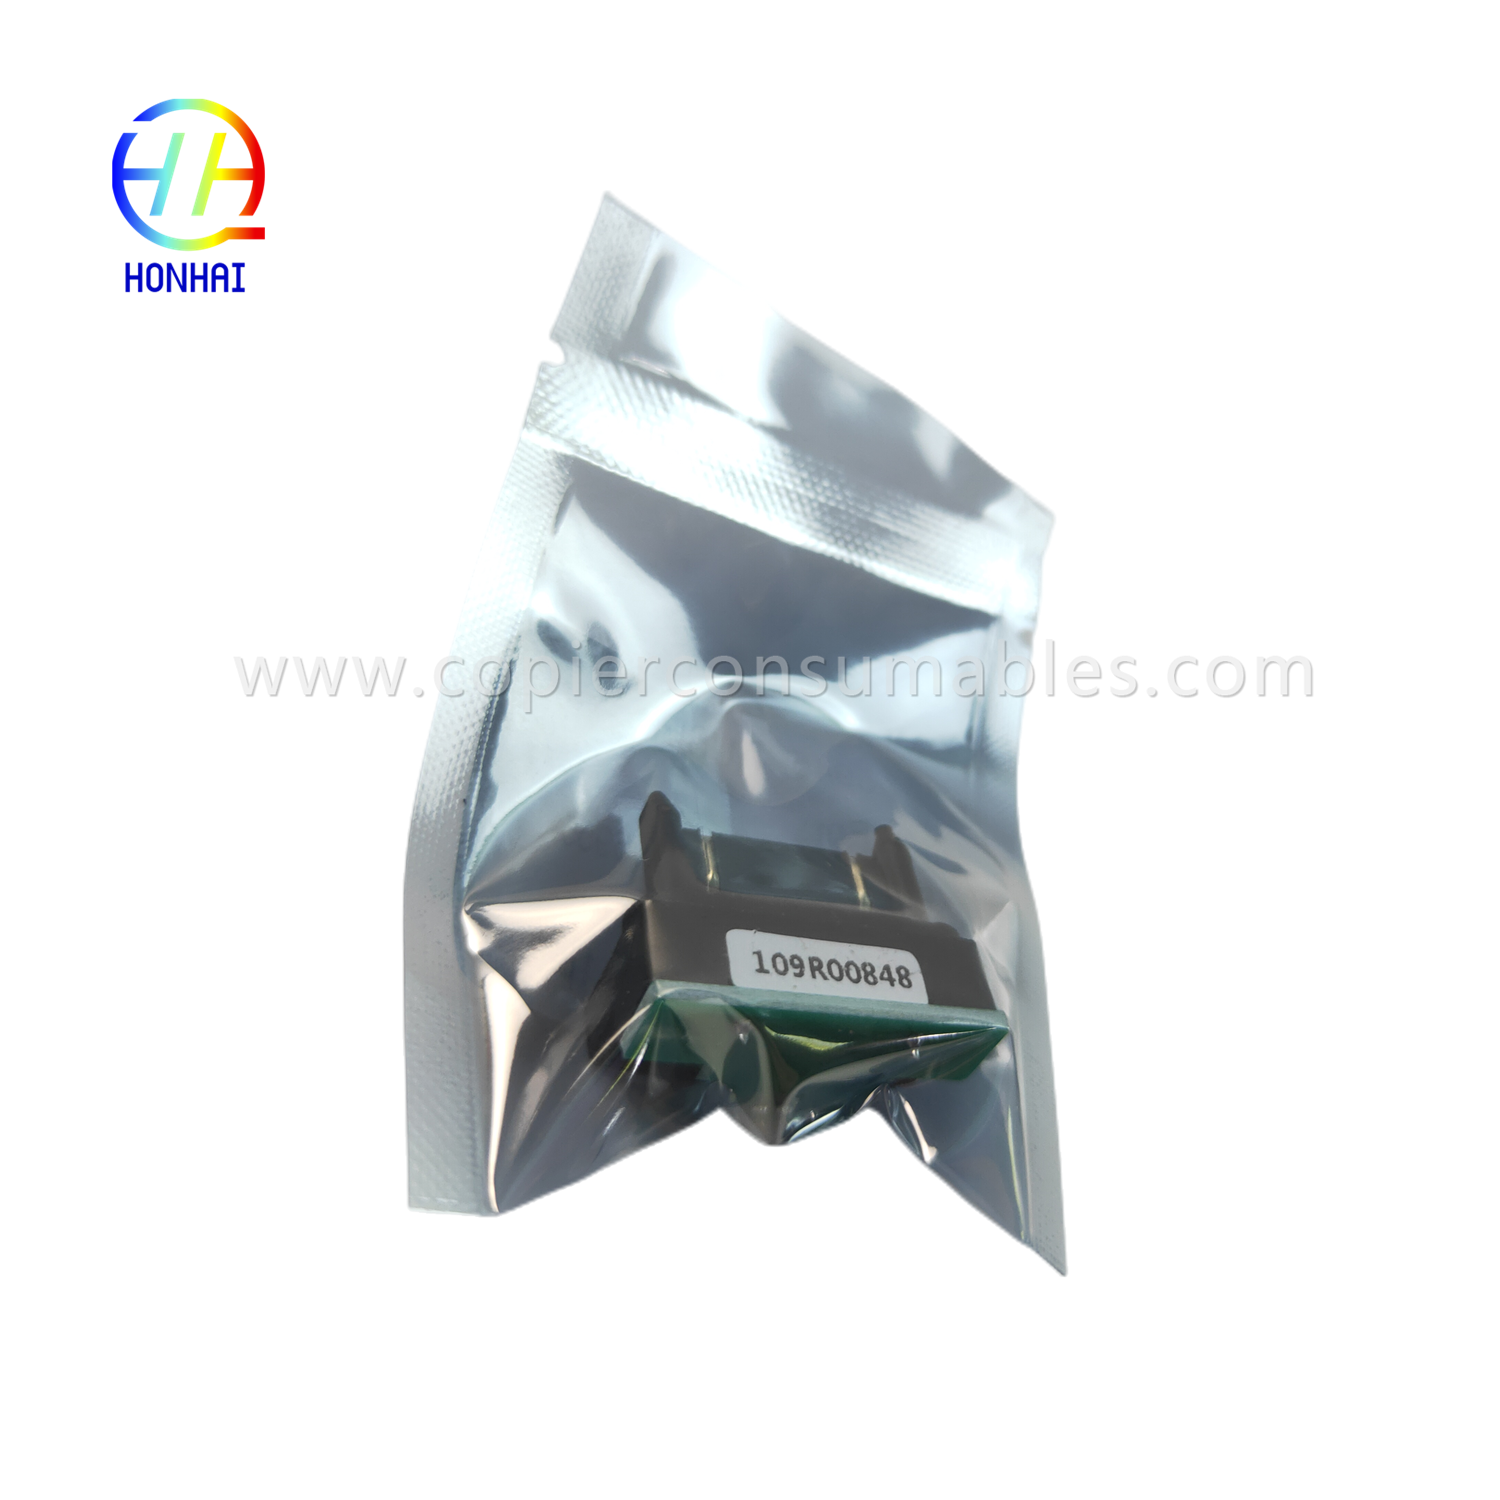 Fuser chip for xerox workcentre 5945 5955 109R00848  chip (5)_副本